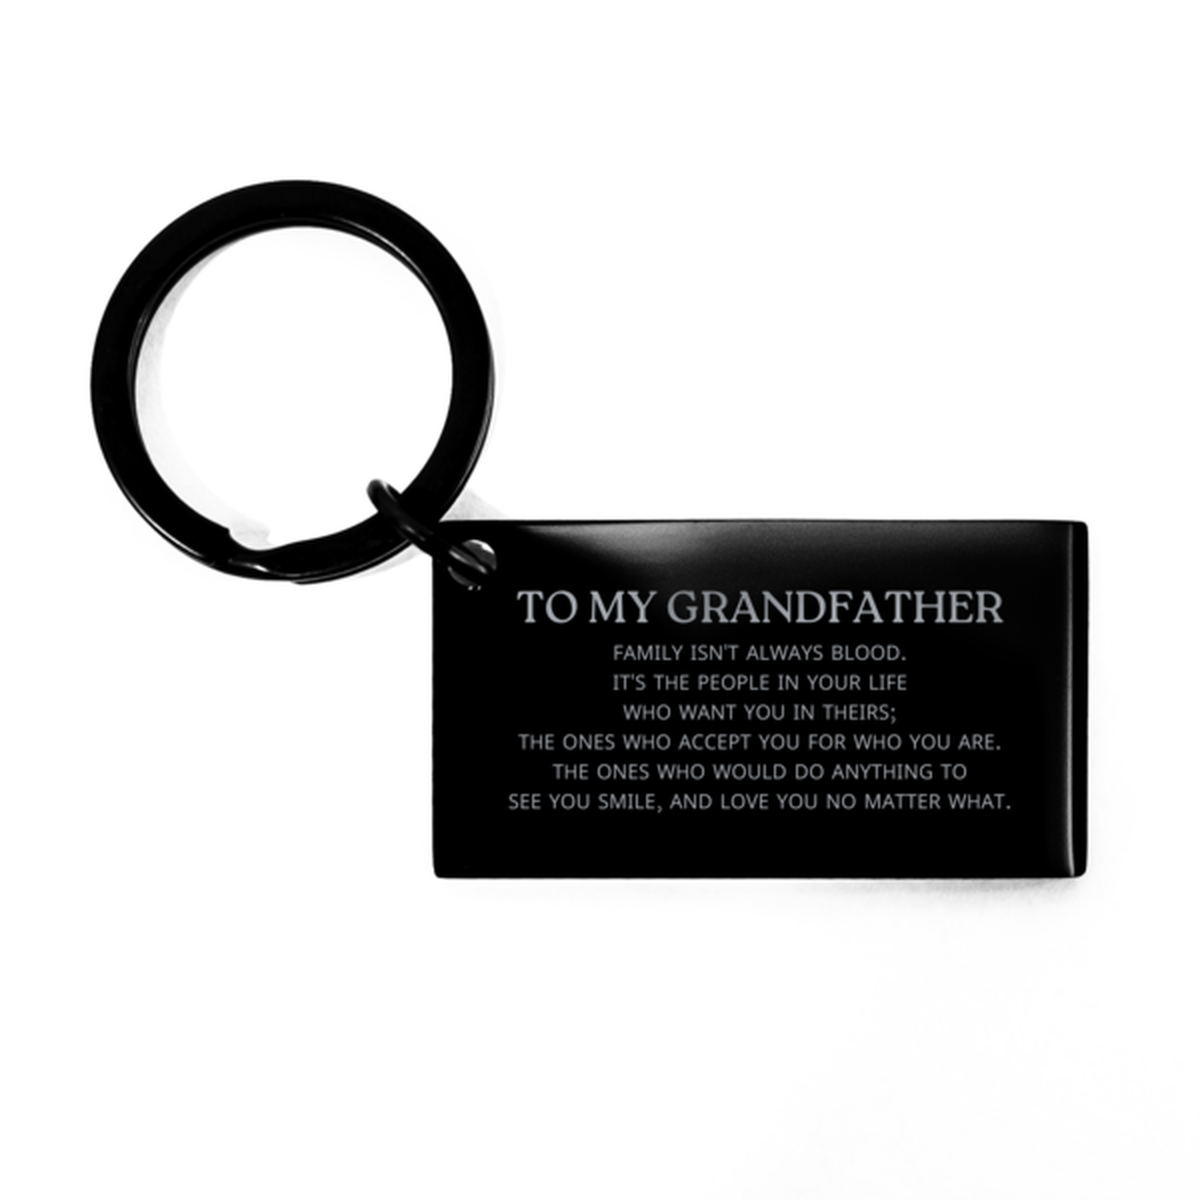 To My Grandfather Gifts, Family isn't always blood, Grandfather Keychain, Birthday Christmas Unique Present For Grandfather